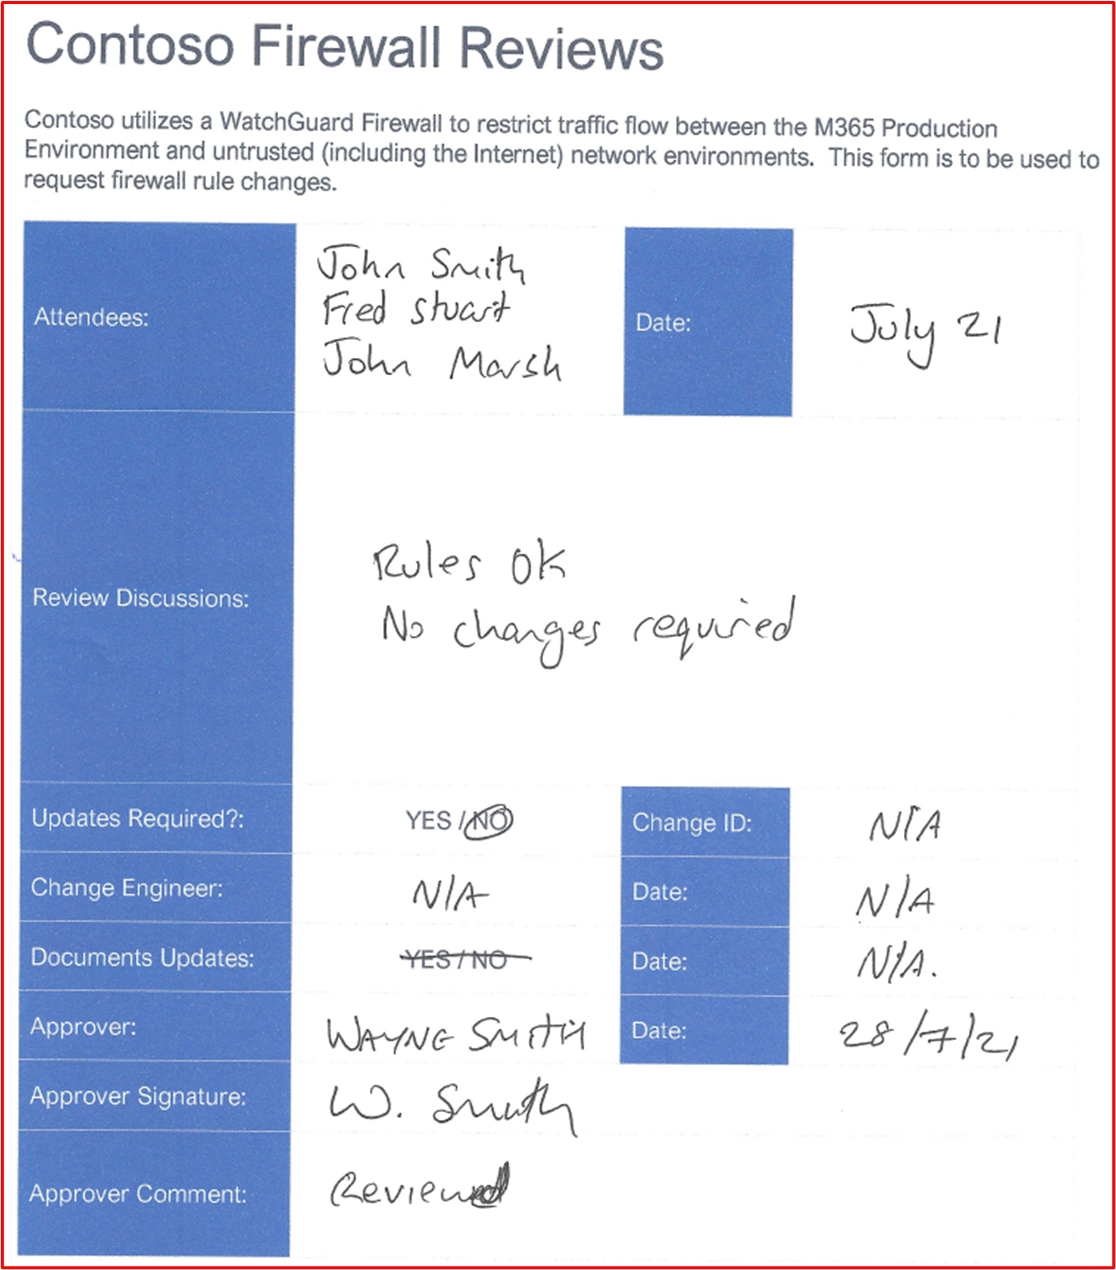 screenshot shows evidence of a Firewall review taking place in July 2021.